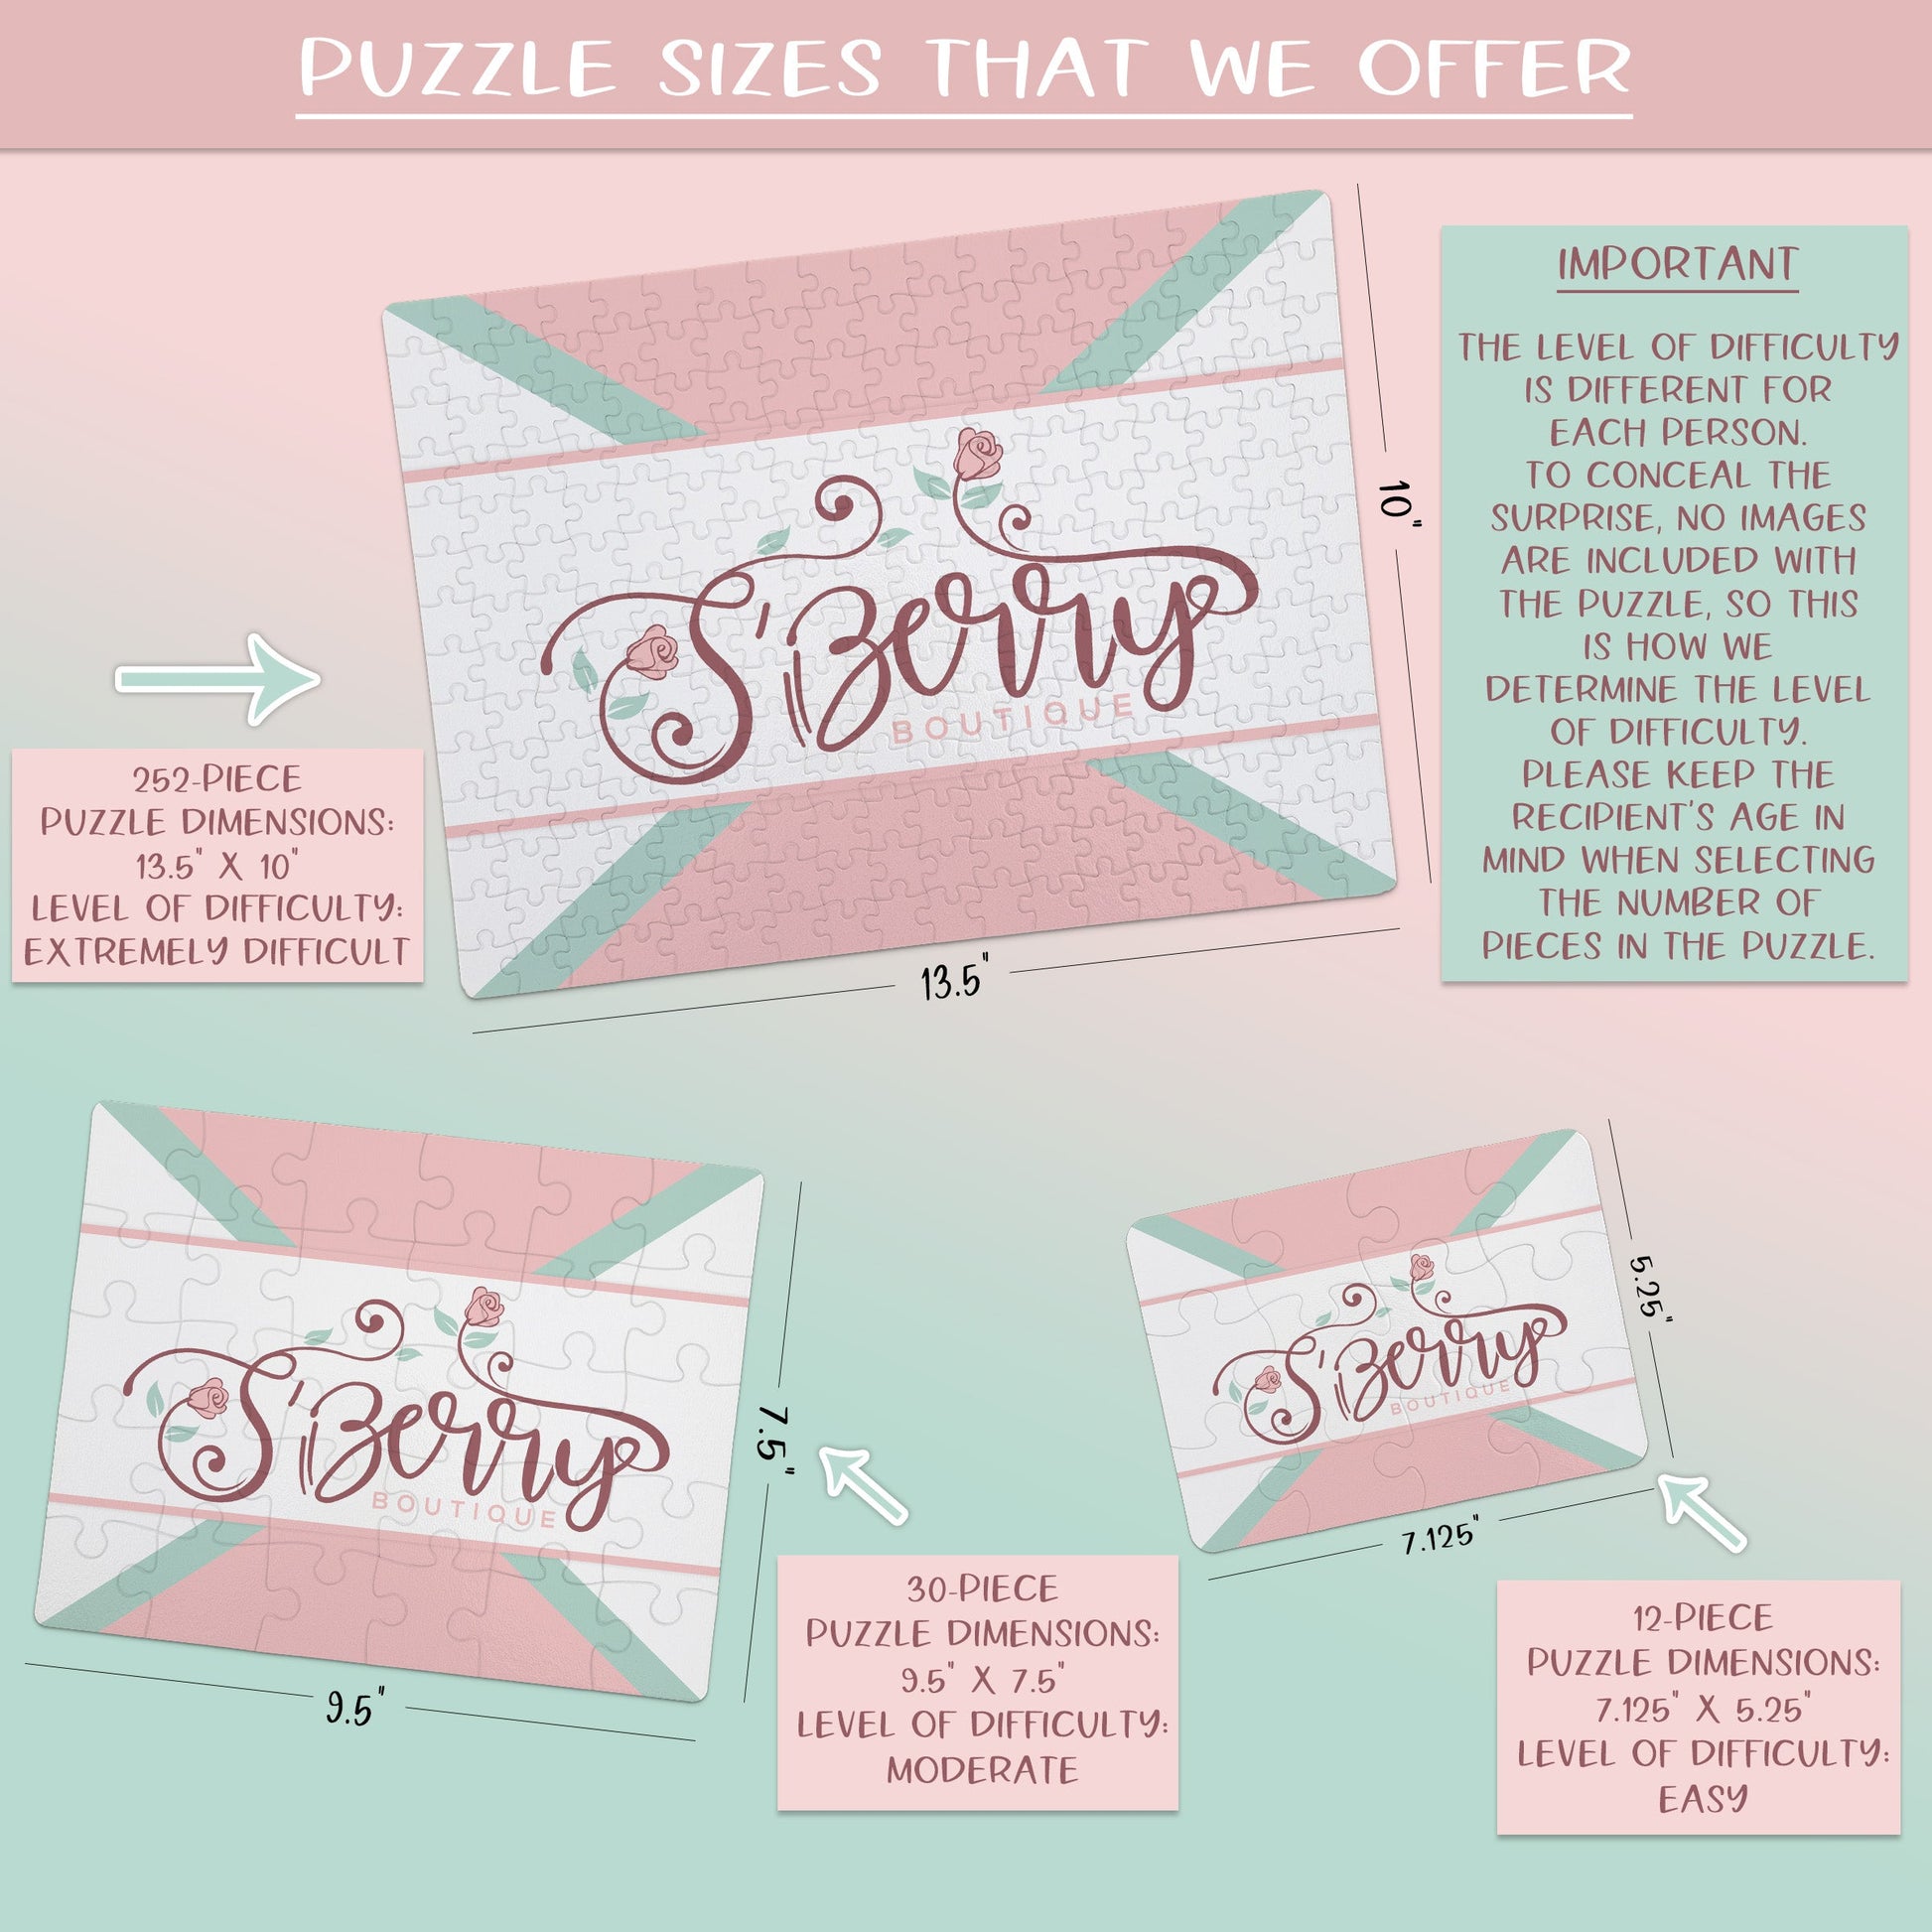 Create Your Own Puzzle - Arrow Design - CYOP0231 | S'Berry Boutique